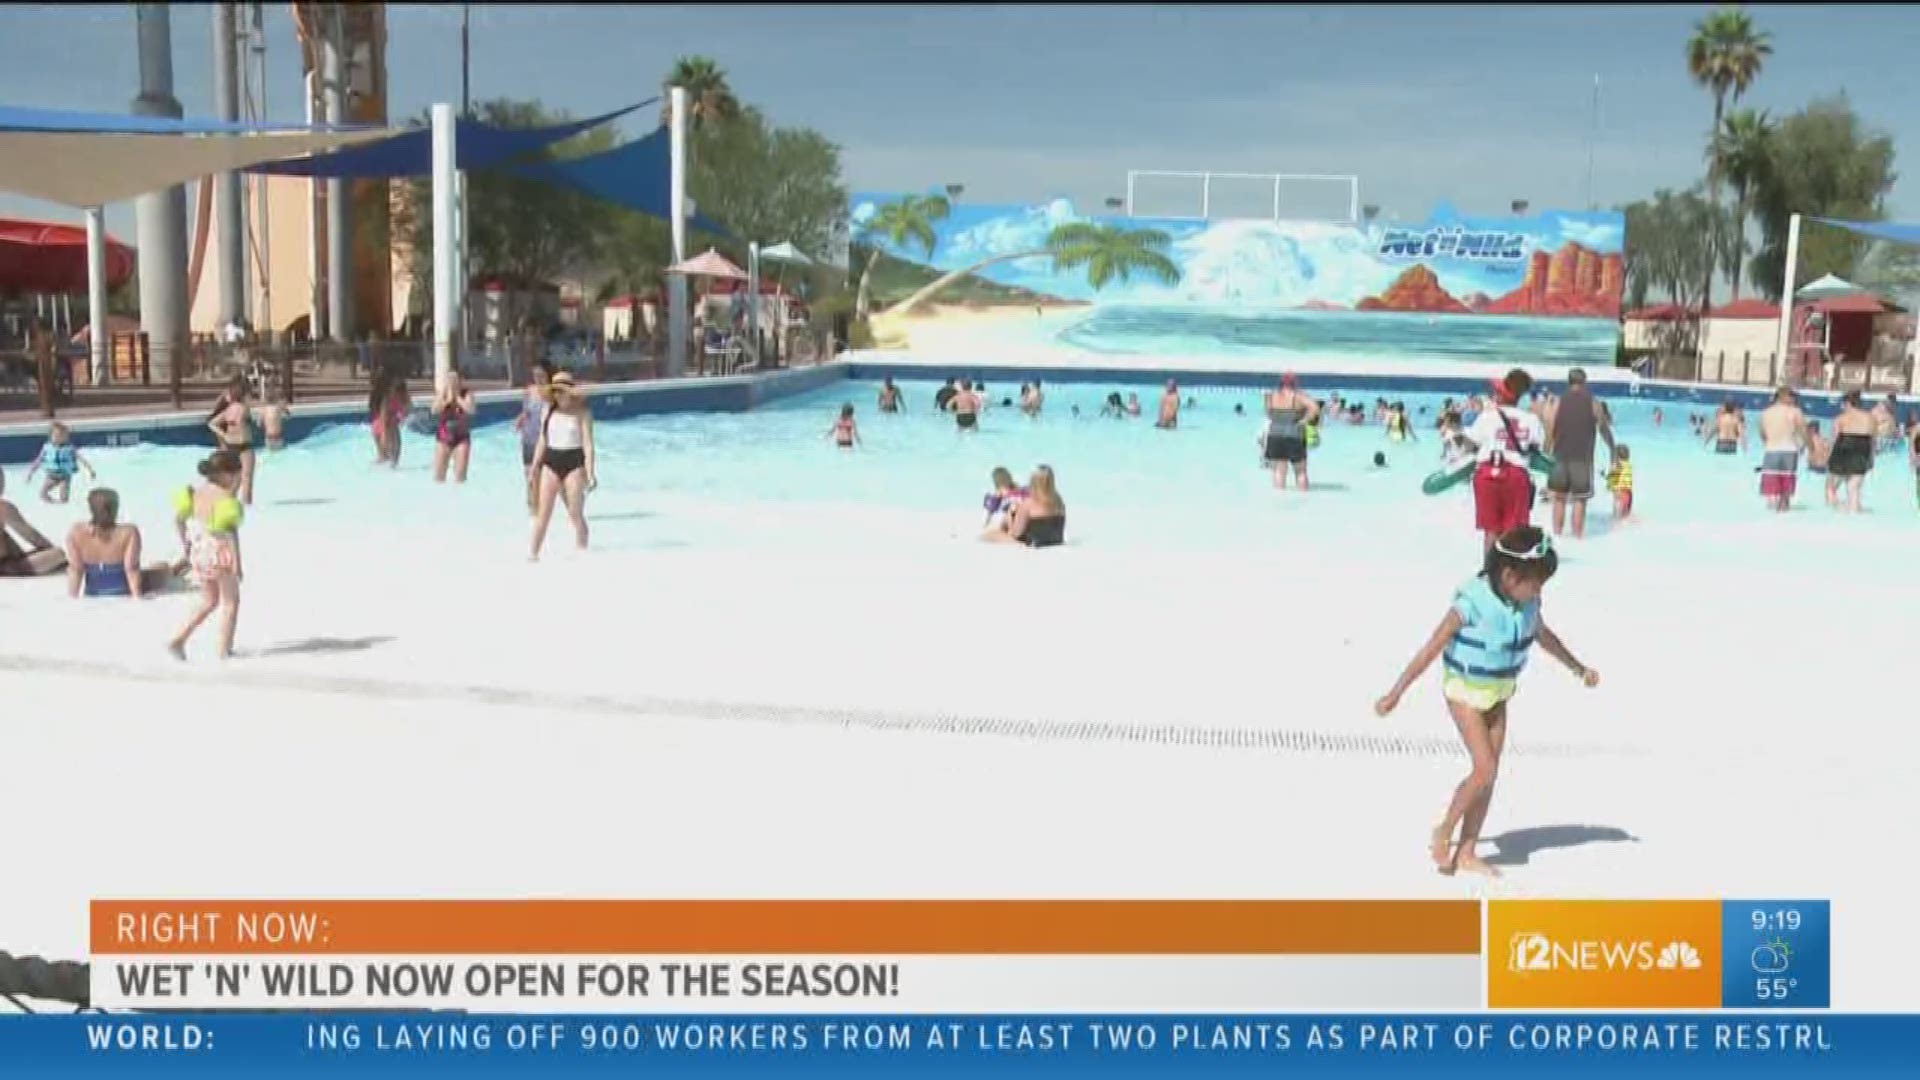 Monica Garcia visited the water park during opening weekend.